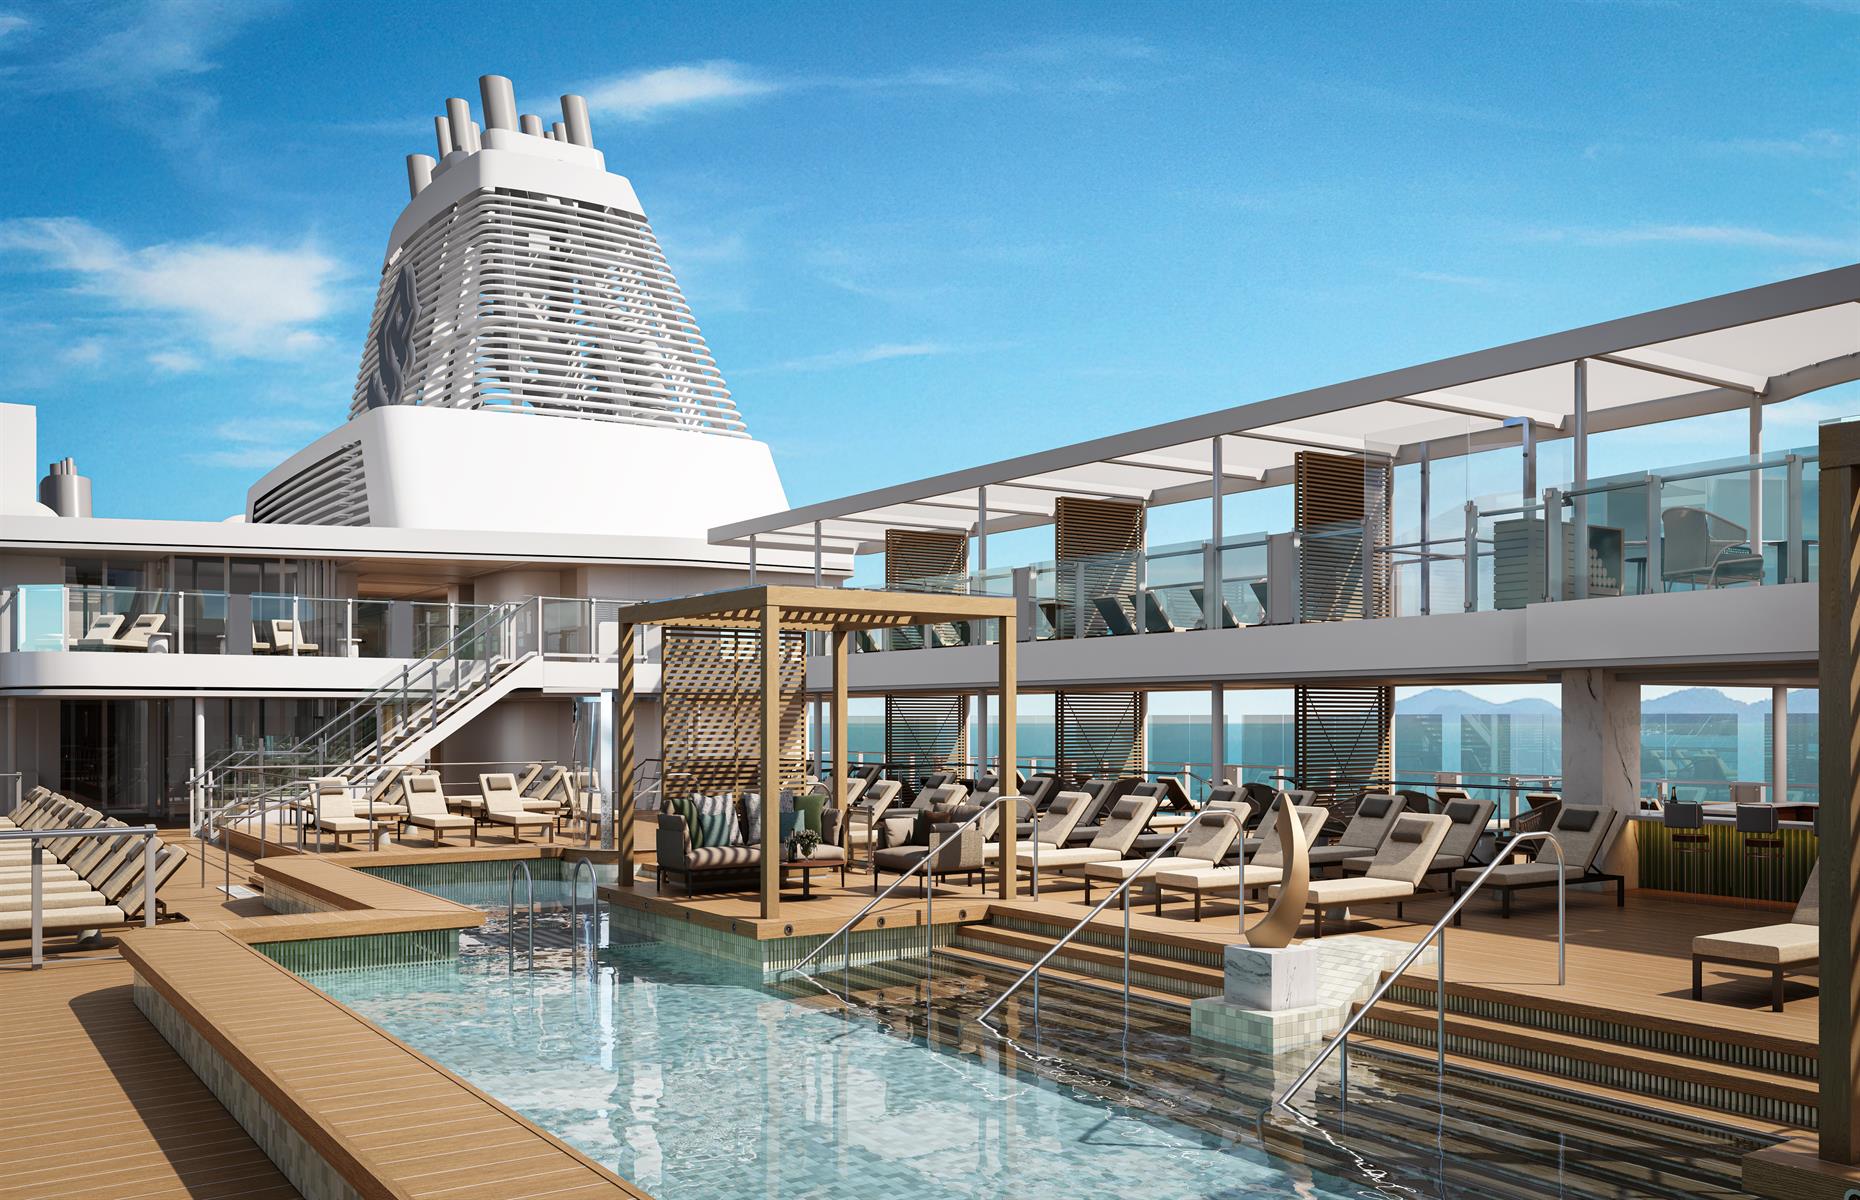 <p>Public areas will include the pool deck, Dusk Bar and Arts Cafe, and further details about onboard amenities will be released prior to her first sailing in June 2024. She'll spend her first few months sailing around the Mediterranean, offering itineraries which take in Athens, Venice and Rome.</p>